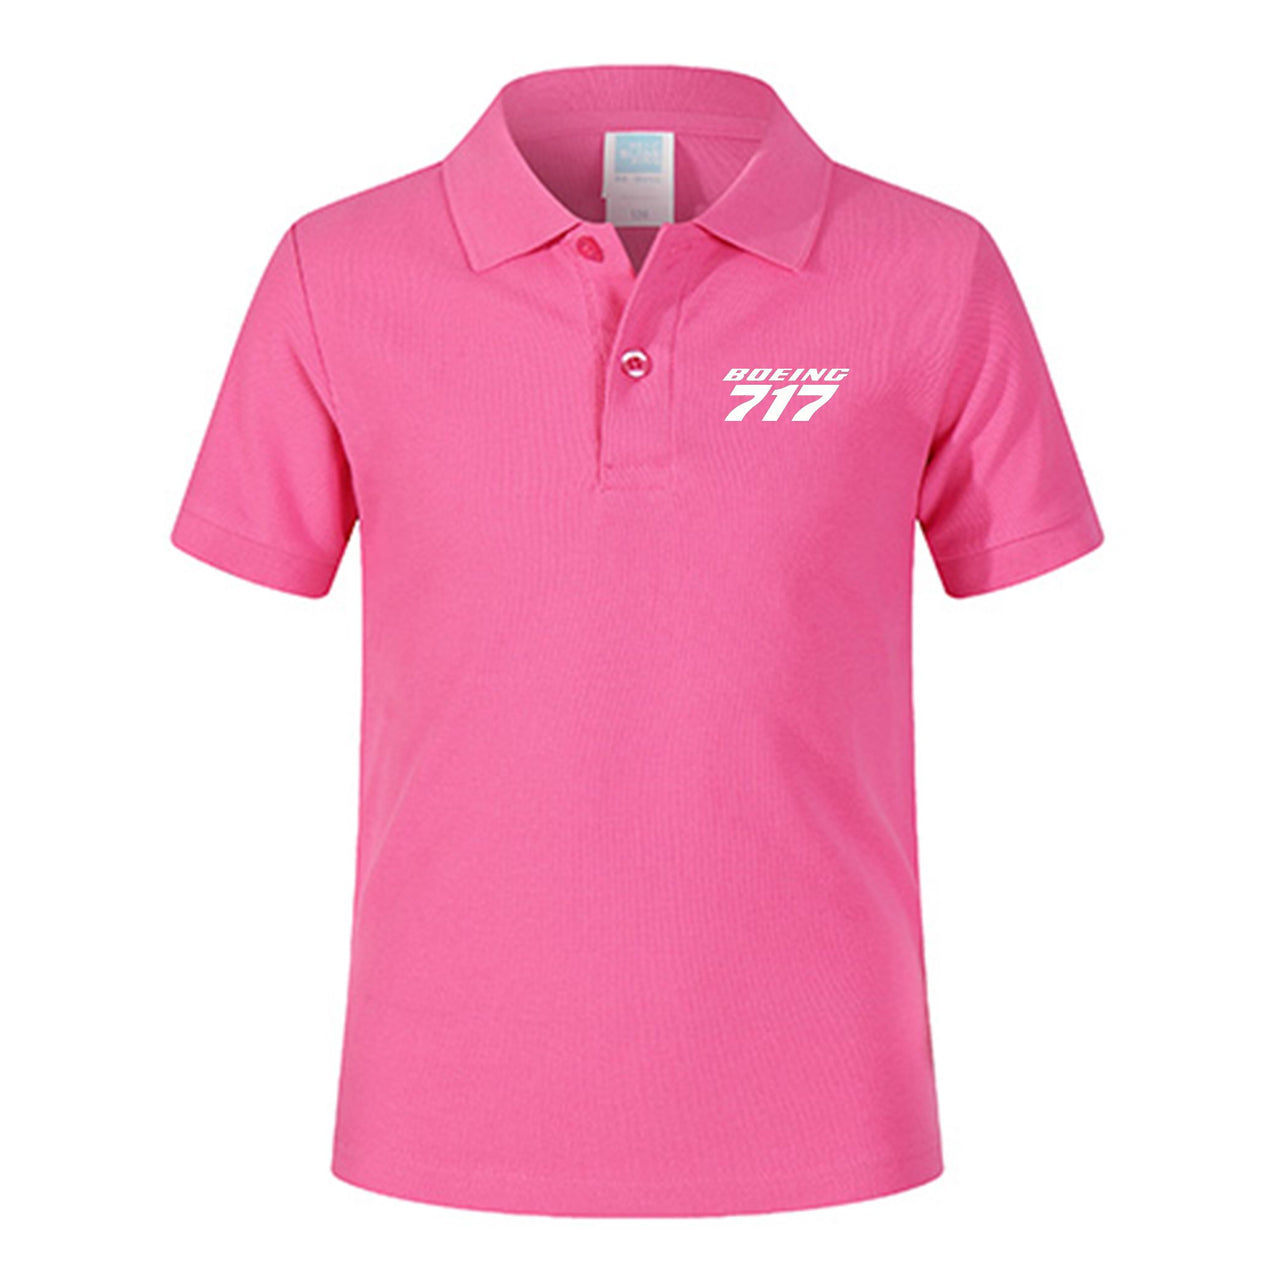 Boeing 717 & Text Designed Children Polo T-Shirts